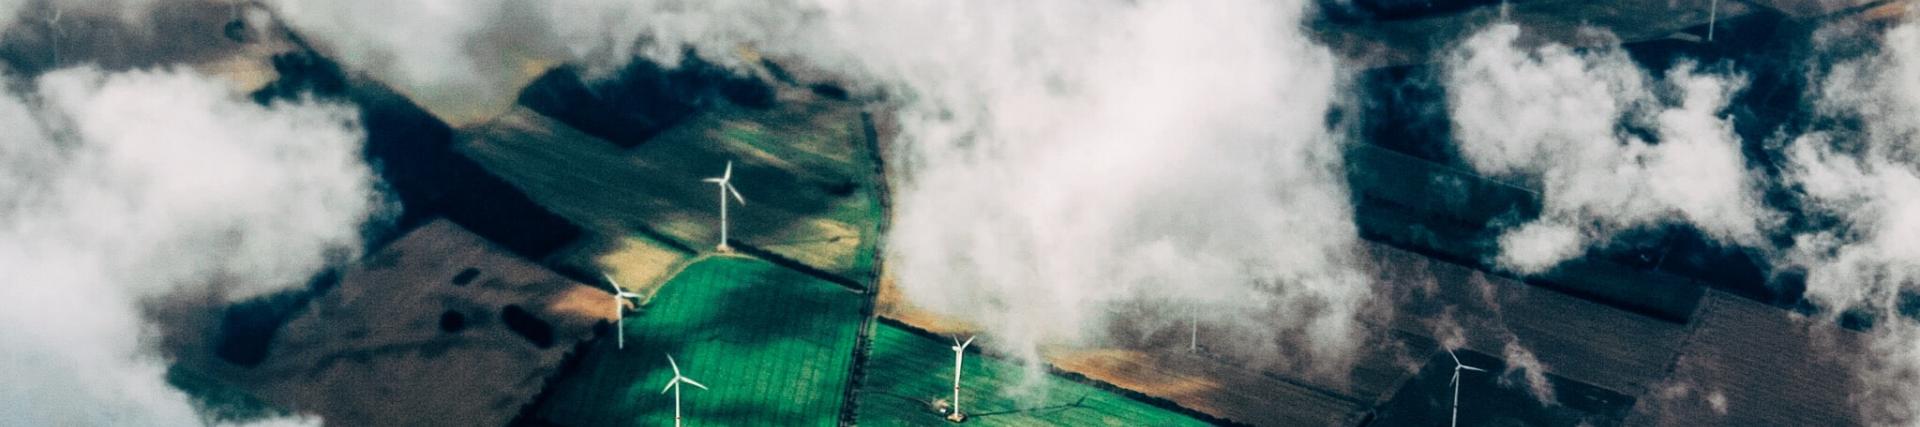 Ariel shot of green and yellow fields. Through the white fluffy clouds, you can see wind turbines dotted over the fields.